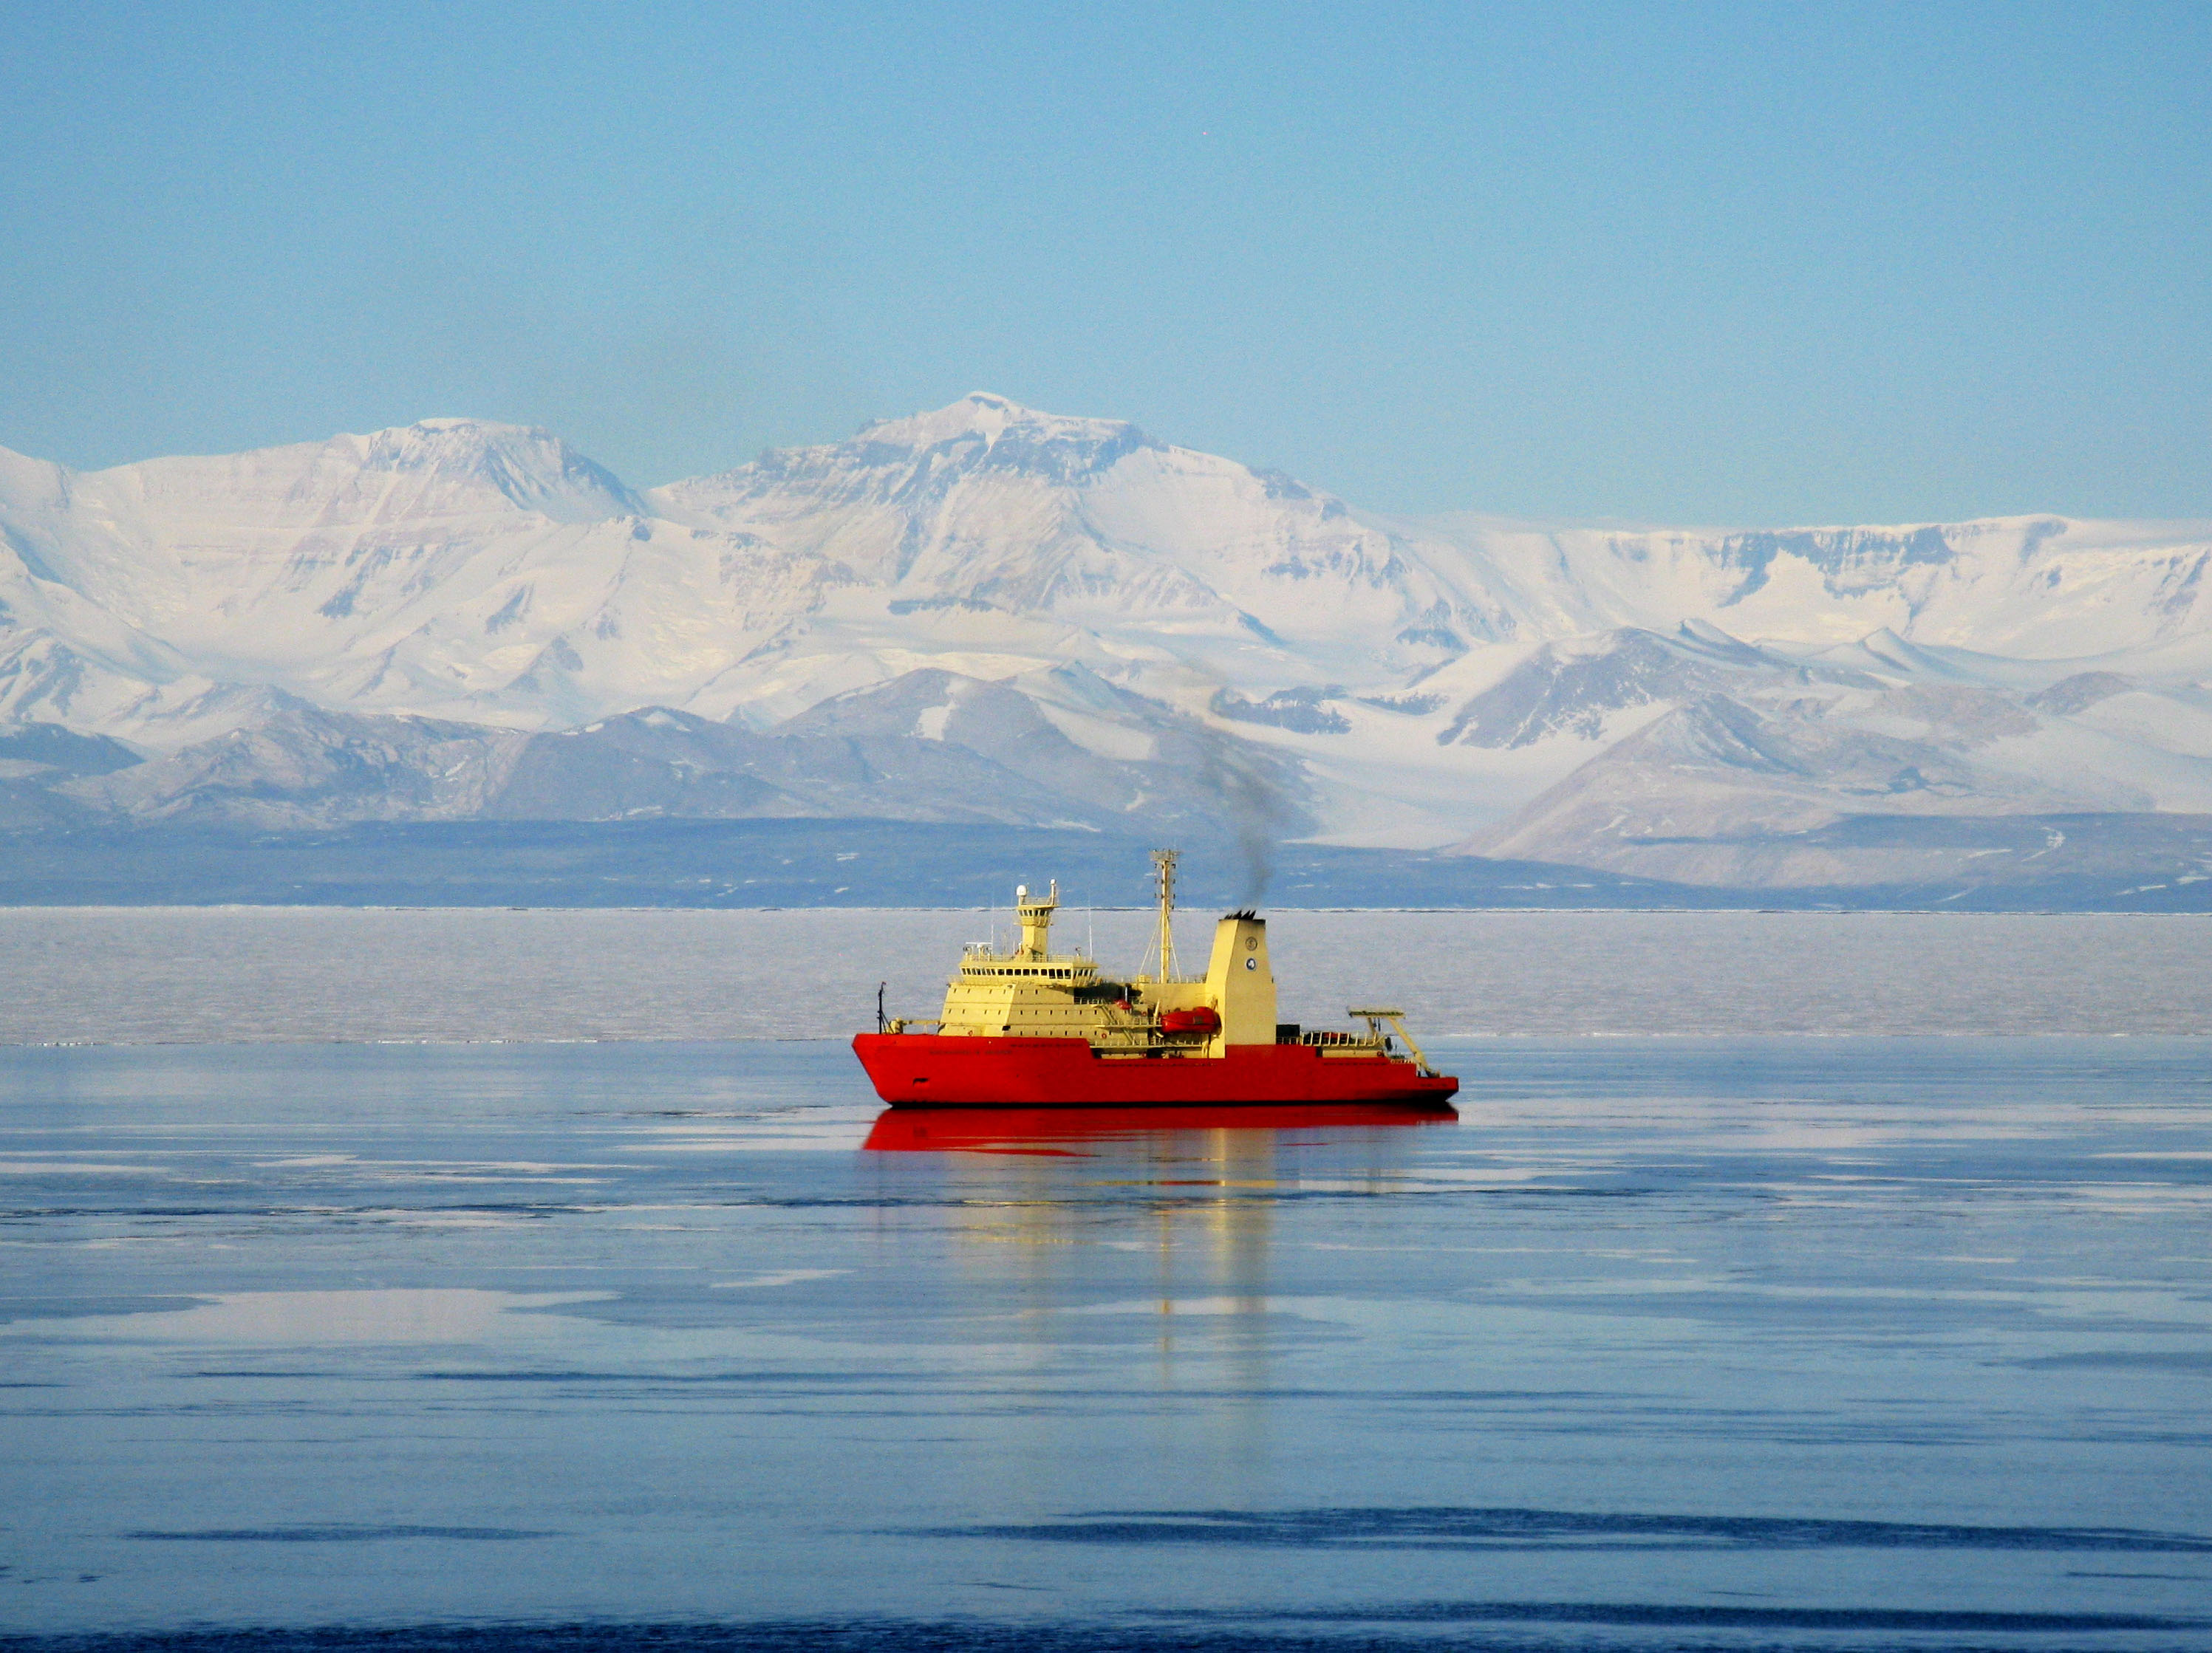 A ship in icy waters.